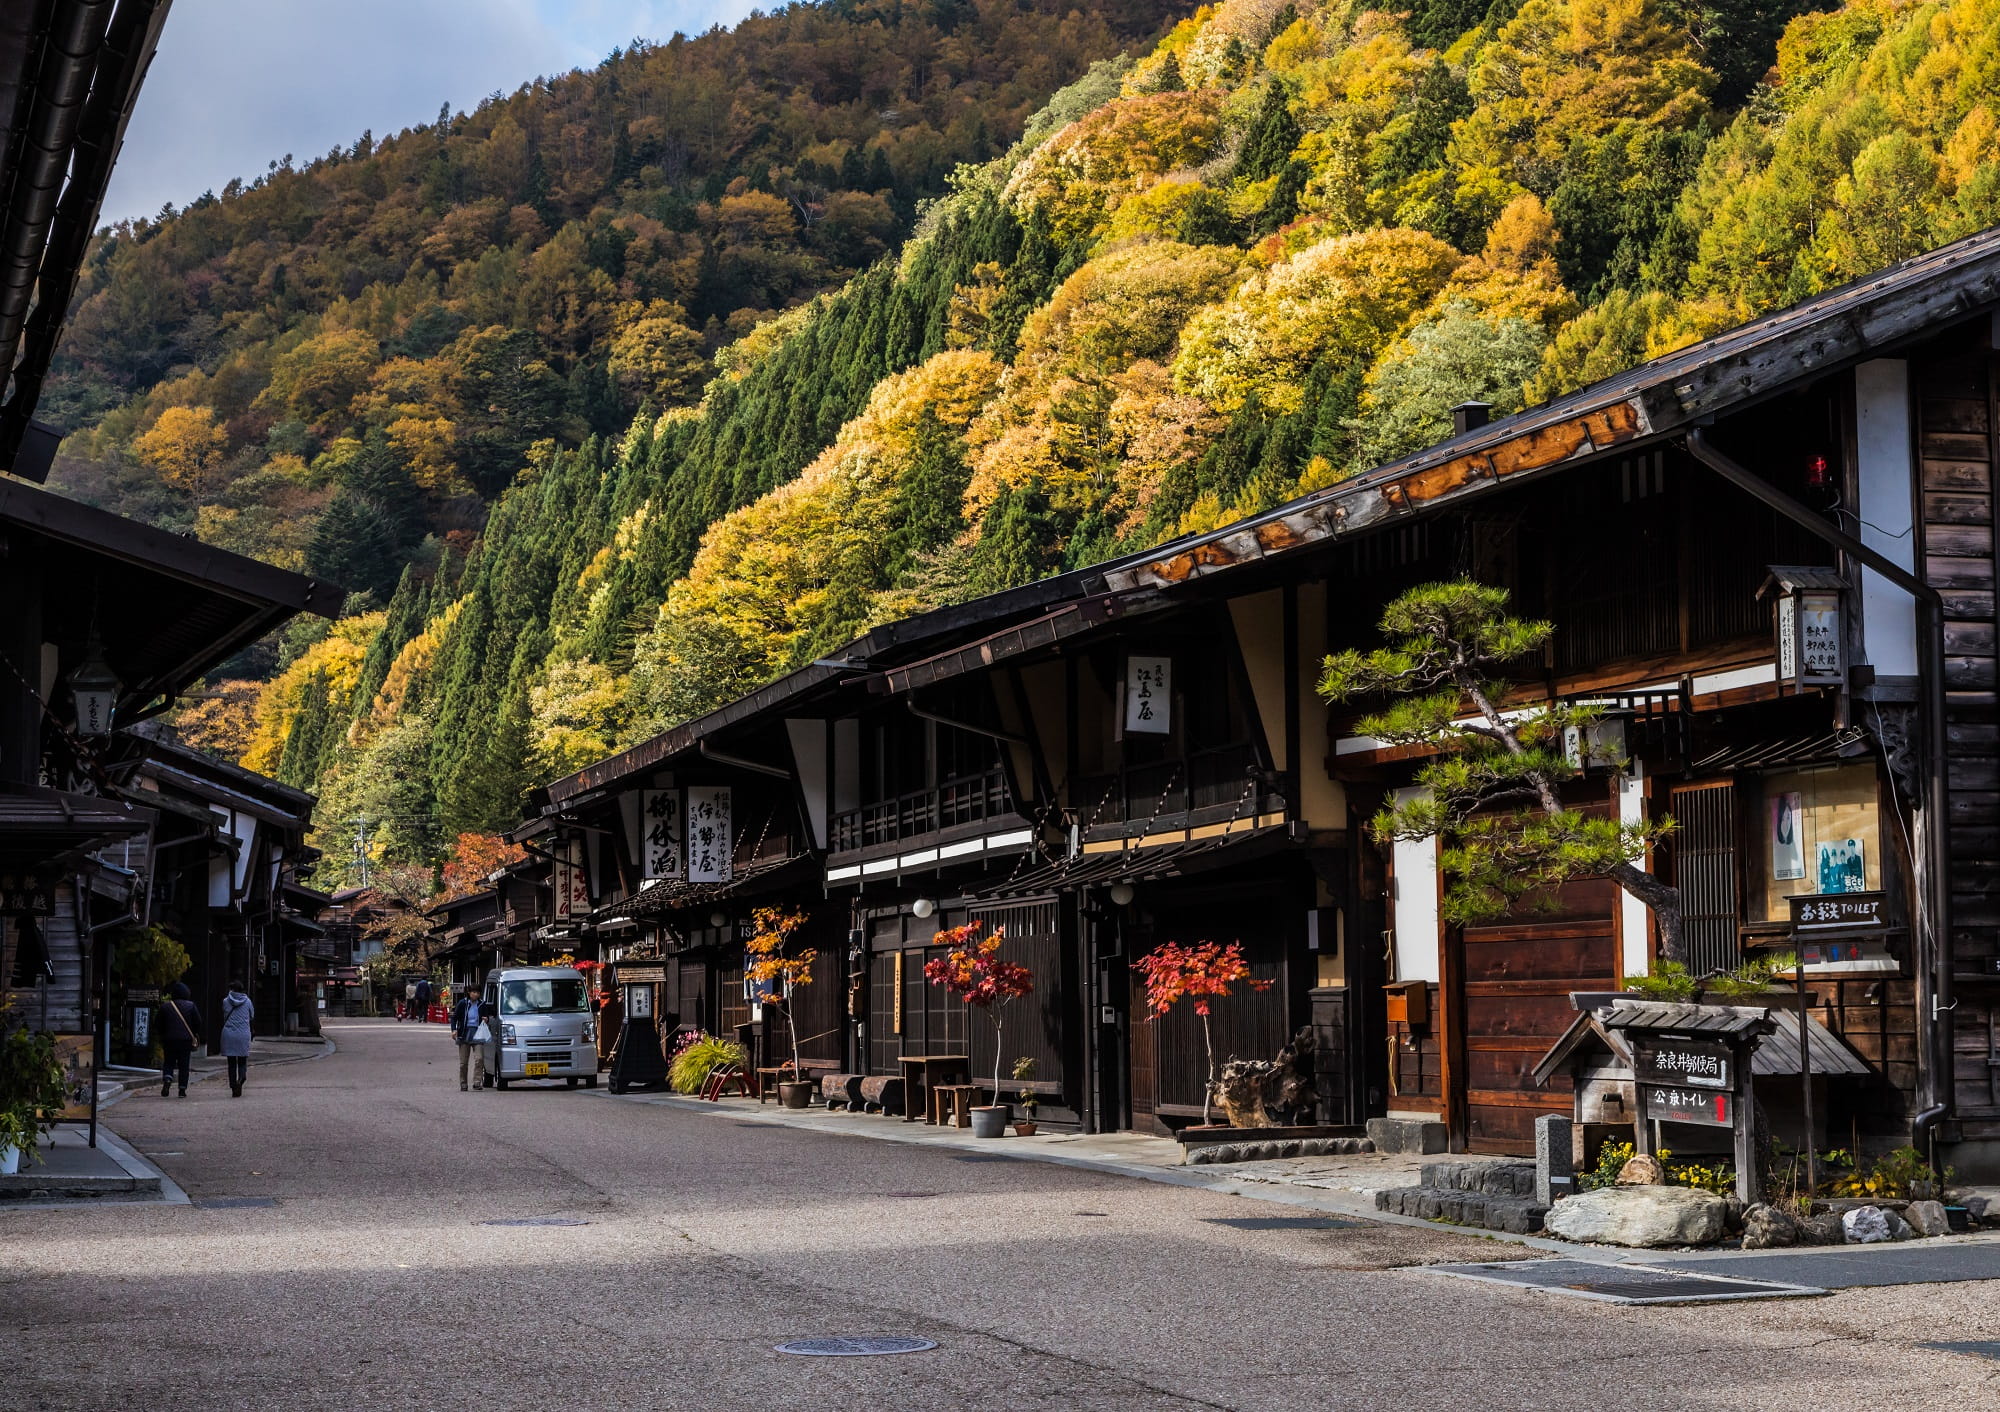 Feel like a traditional traveler as you wander a section of Nagano that once connected Tokyo to Kyoto.